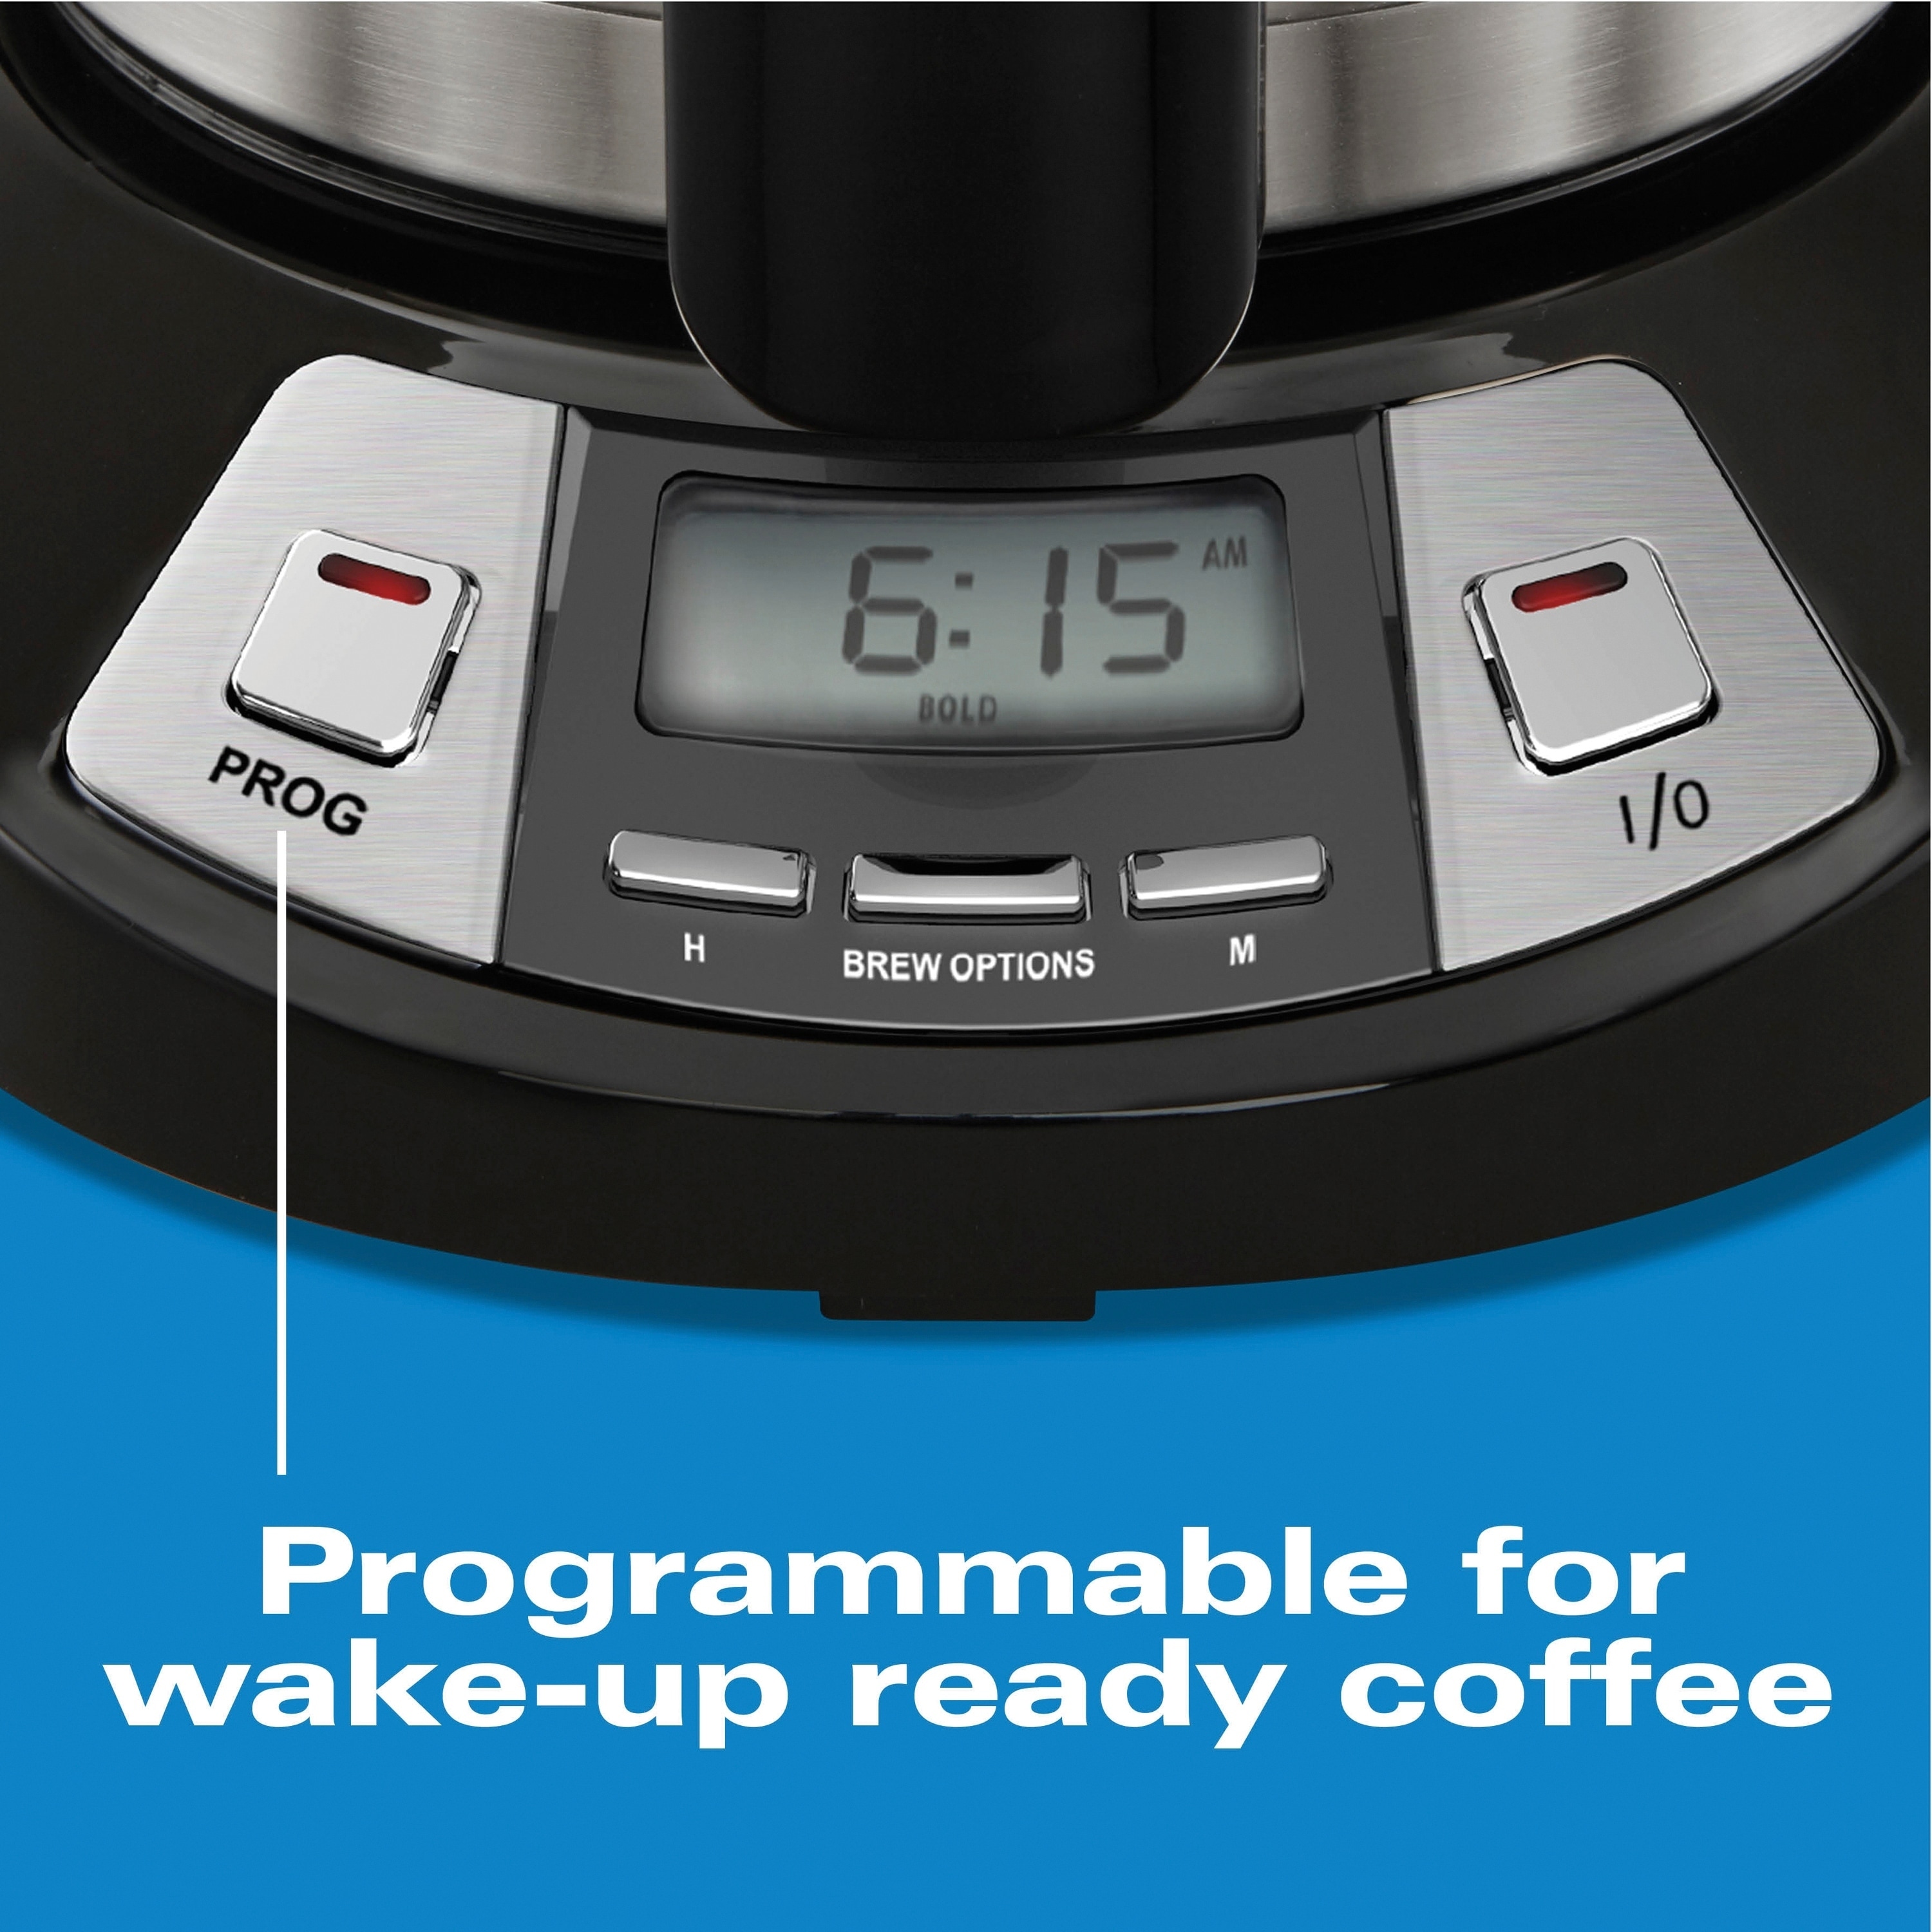 https://ak1.ostkcdn.com/images/products/30970355/Hamilton-Beach-8-Cup-Programmable-Coffee-Maker-with-Thermal-Carafe-98644815-fe0d-4bf2-acbe-4b9f9646c8ec.jpg